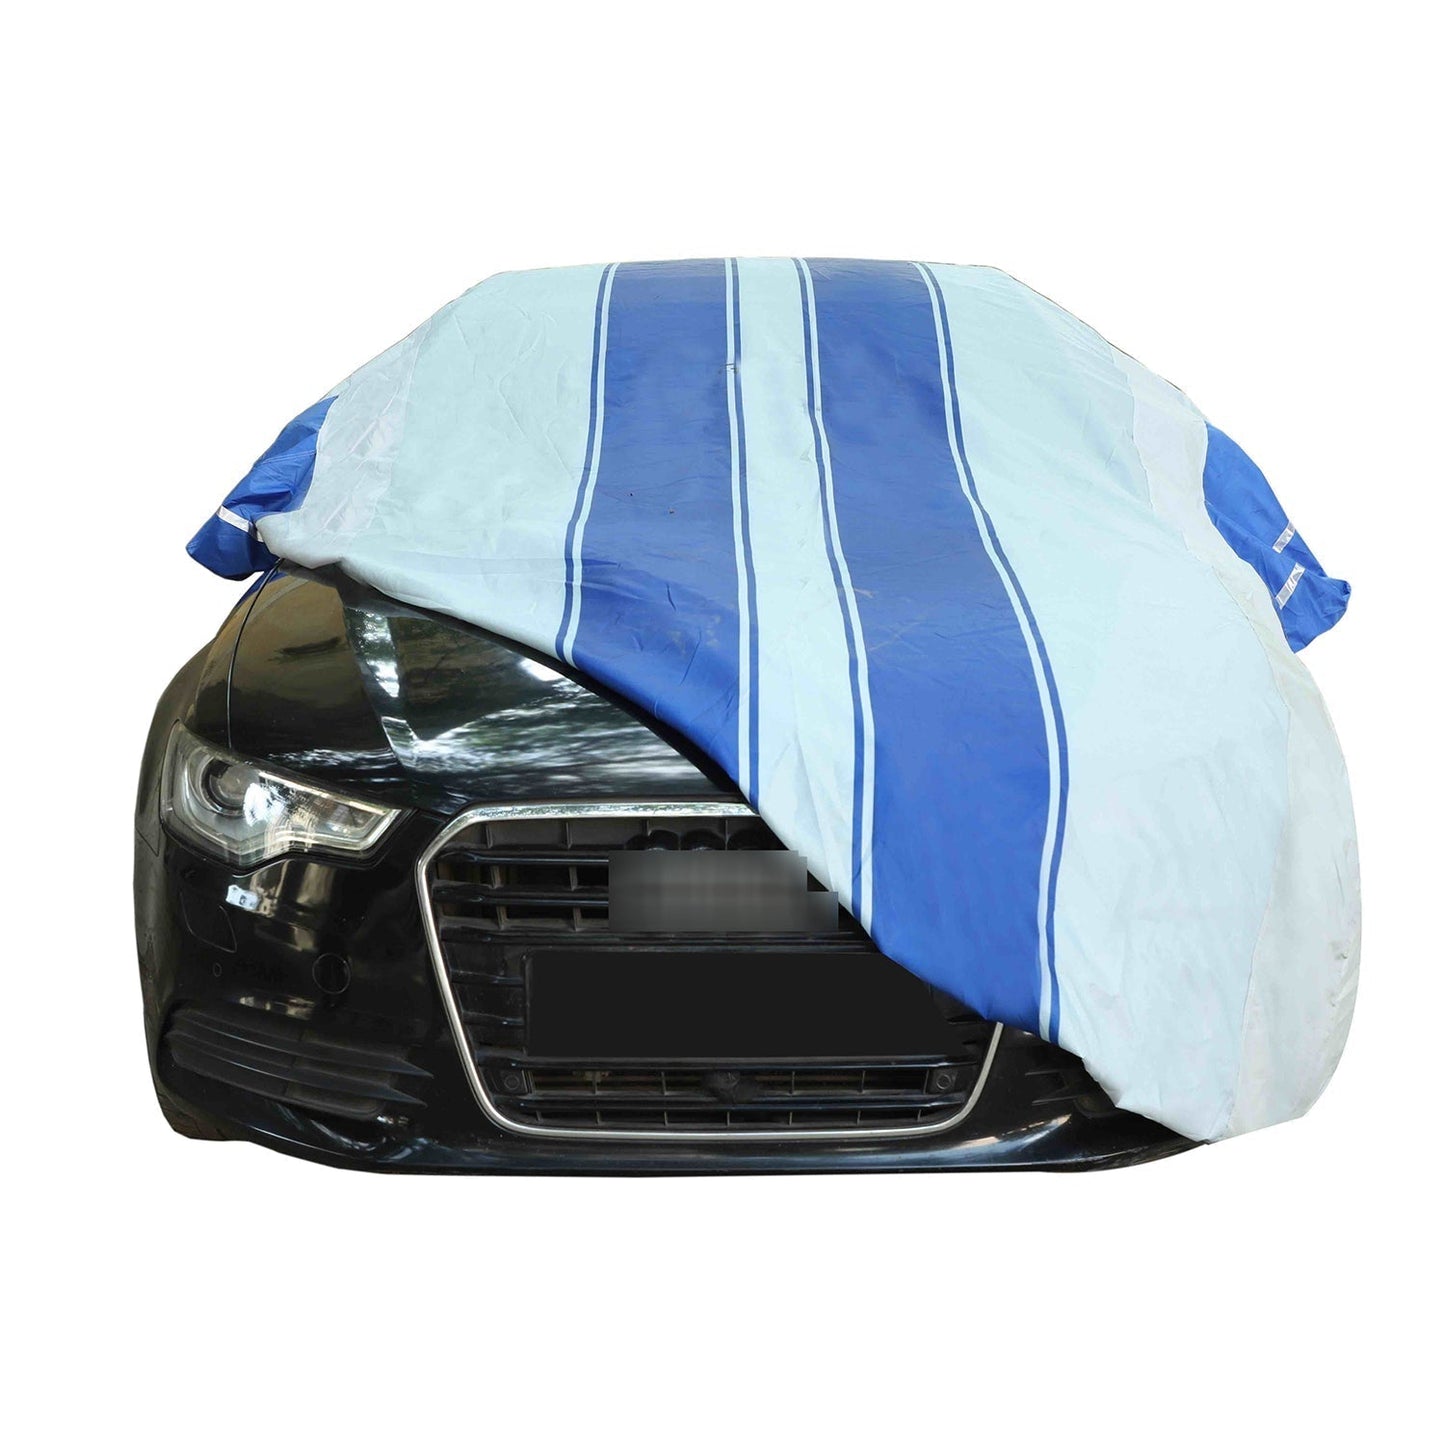 Oshotto 100% Blue dustproof and Water Resistant Car Body Cover with Mirror Pockets For Range Rover Evoque